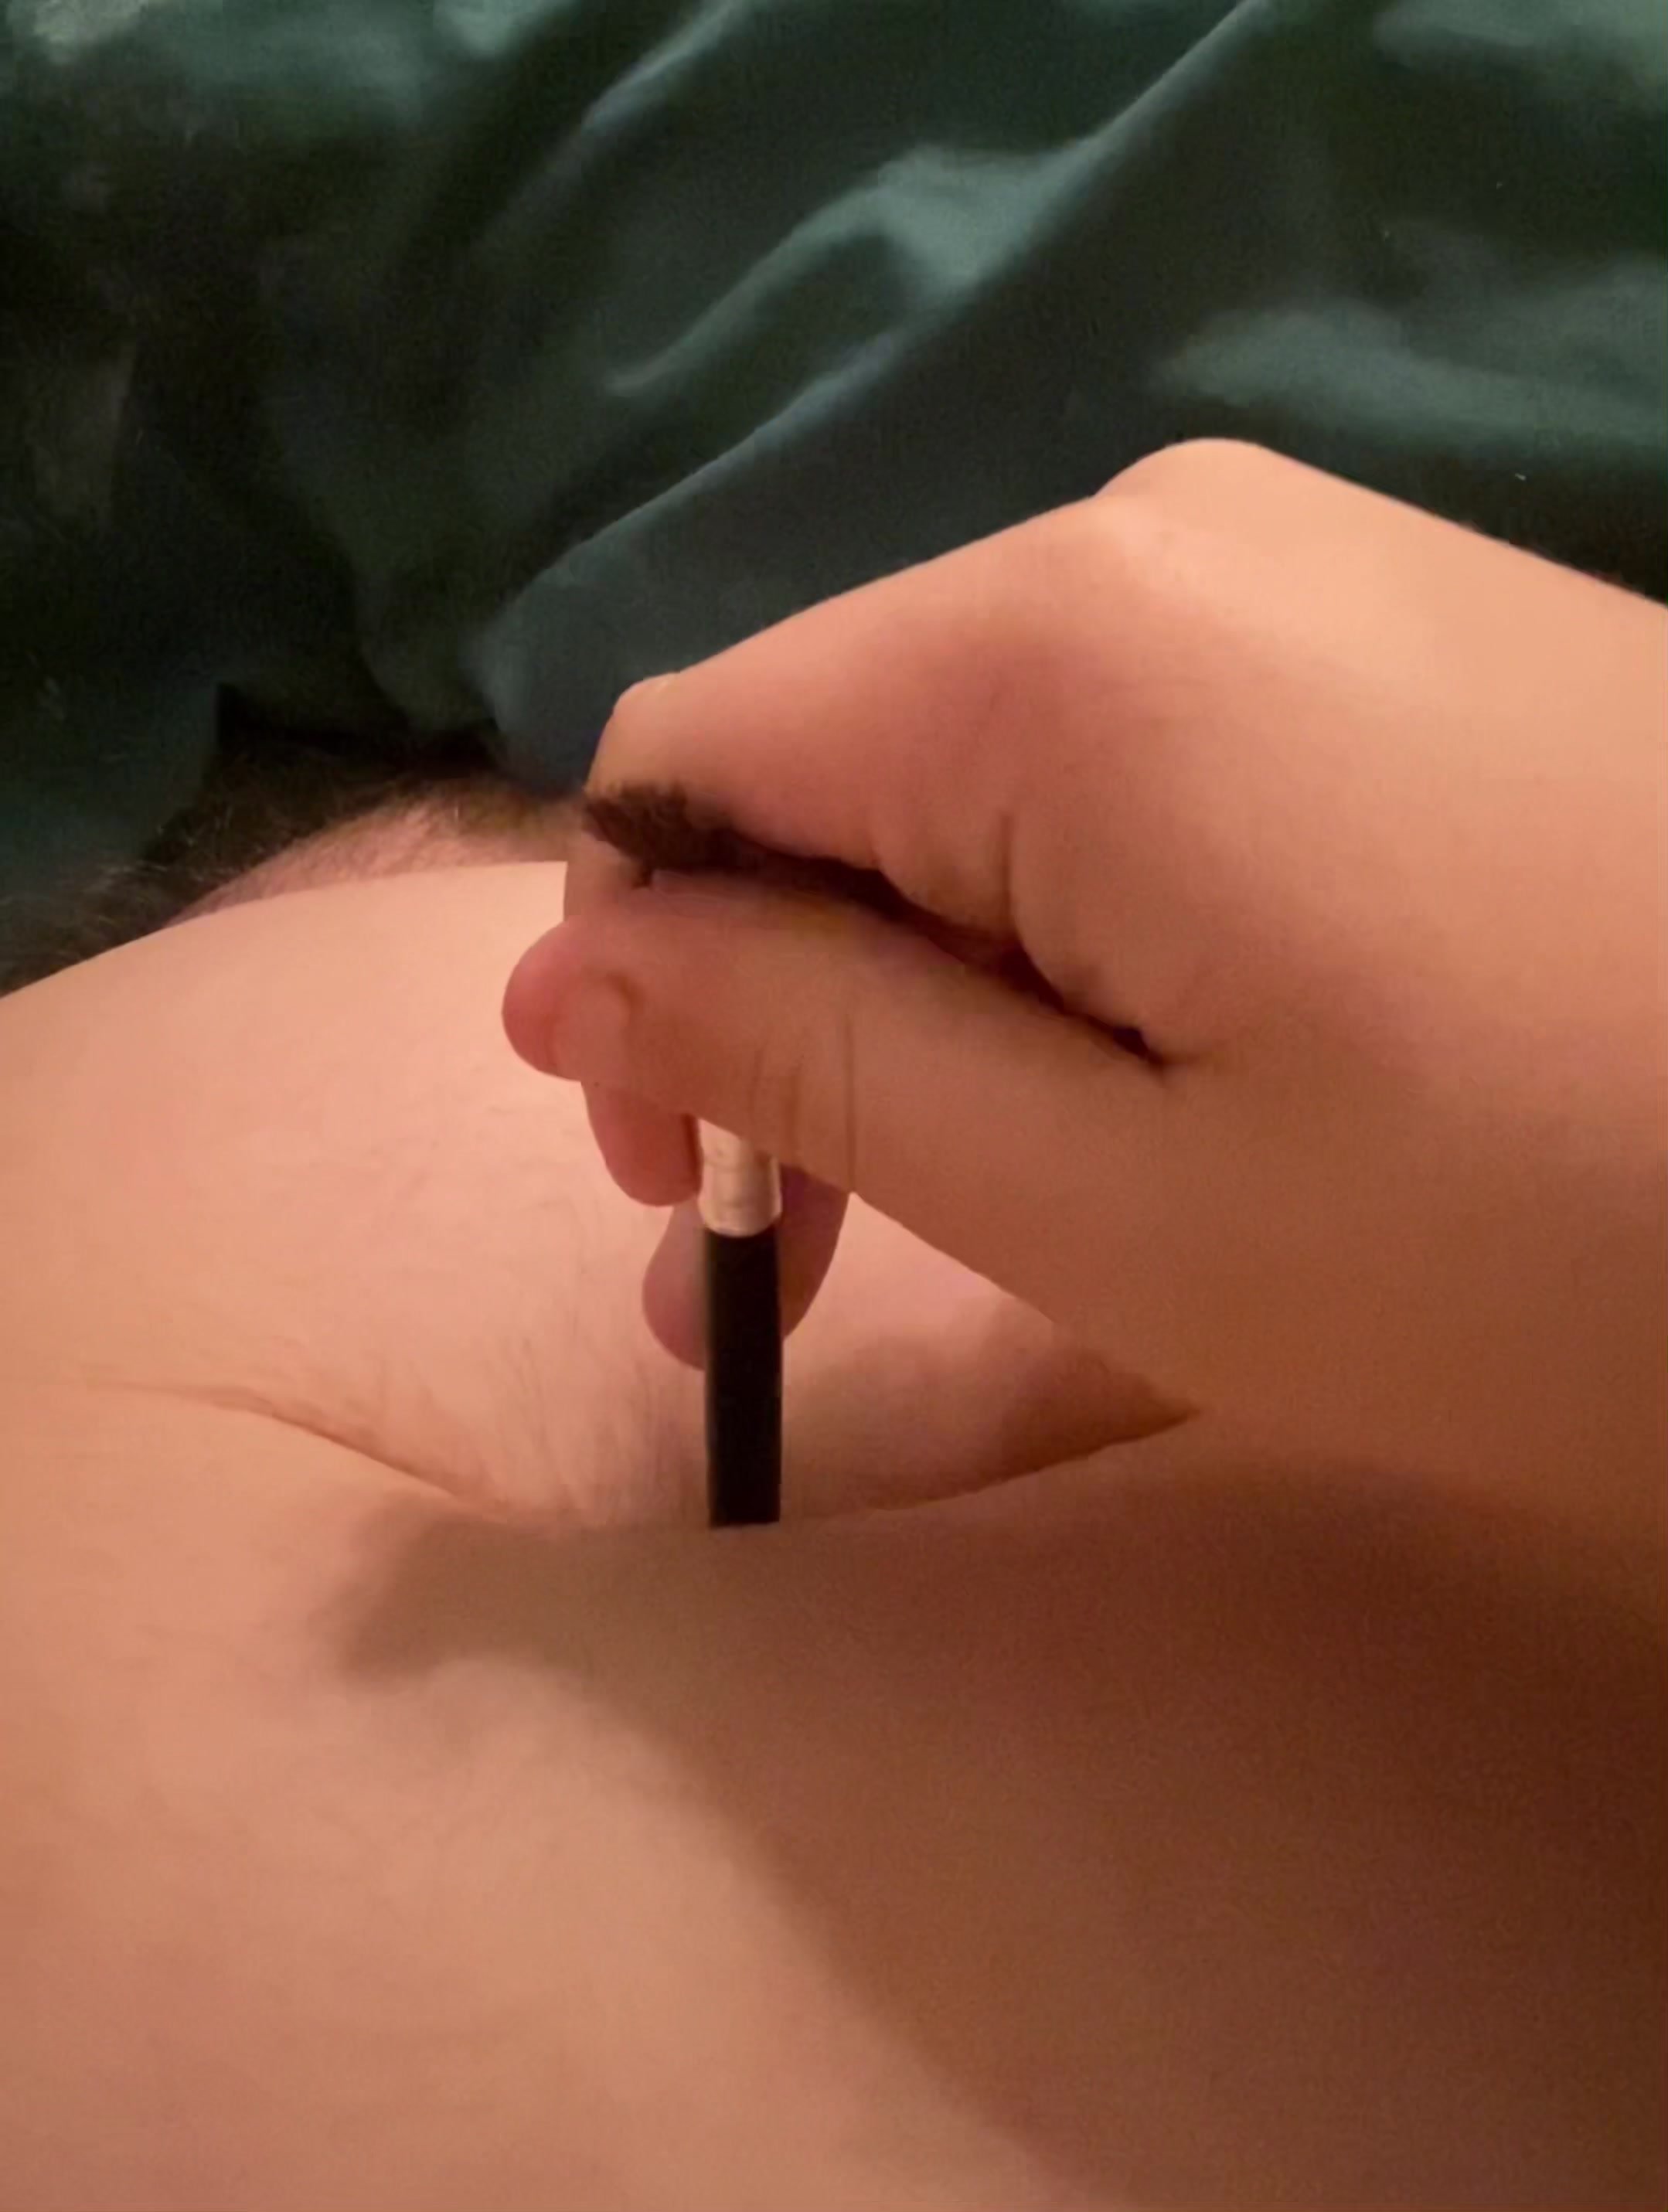 Amateur bellybutton/navel play